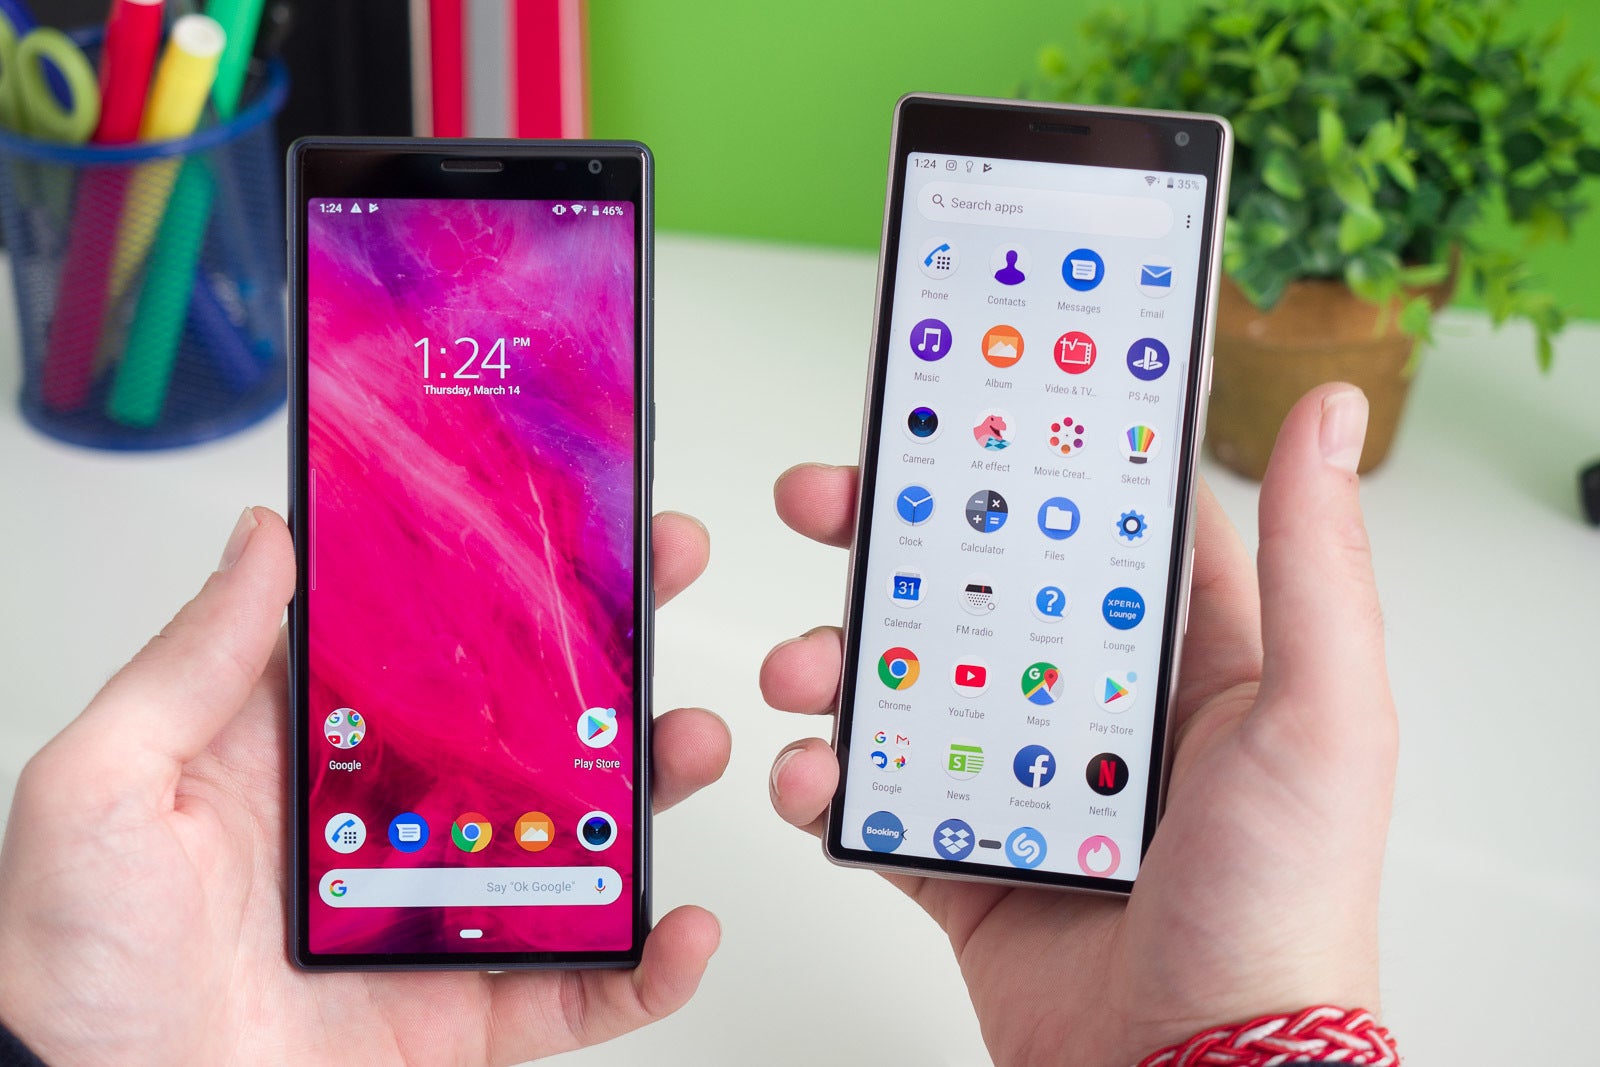 The Sony Xperia 20 should look just like the Xperia 10 series - Leaked Sony Xperia 20 specs point towards big upgrades